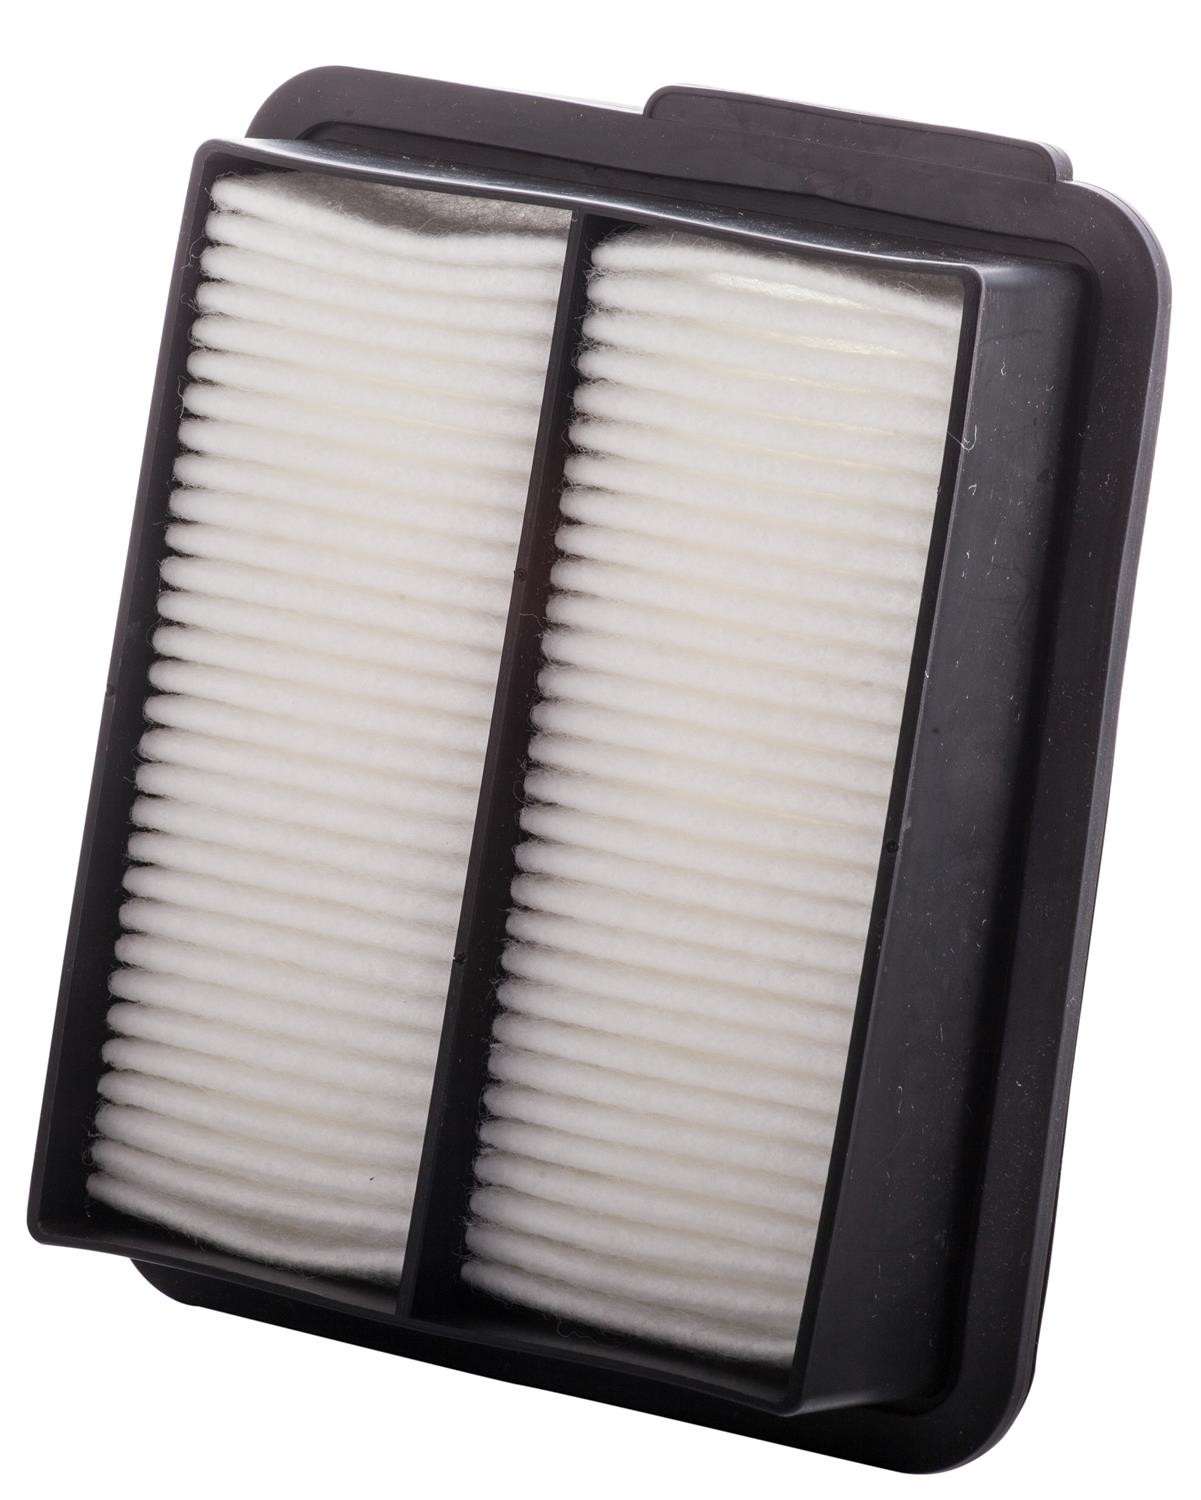 Back View of Air Filter PRONTO PA99236